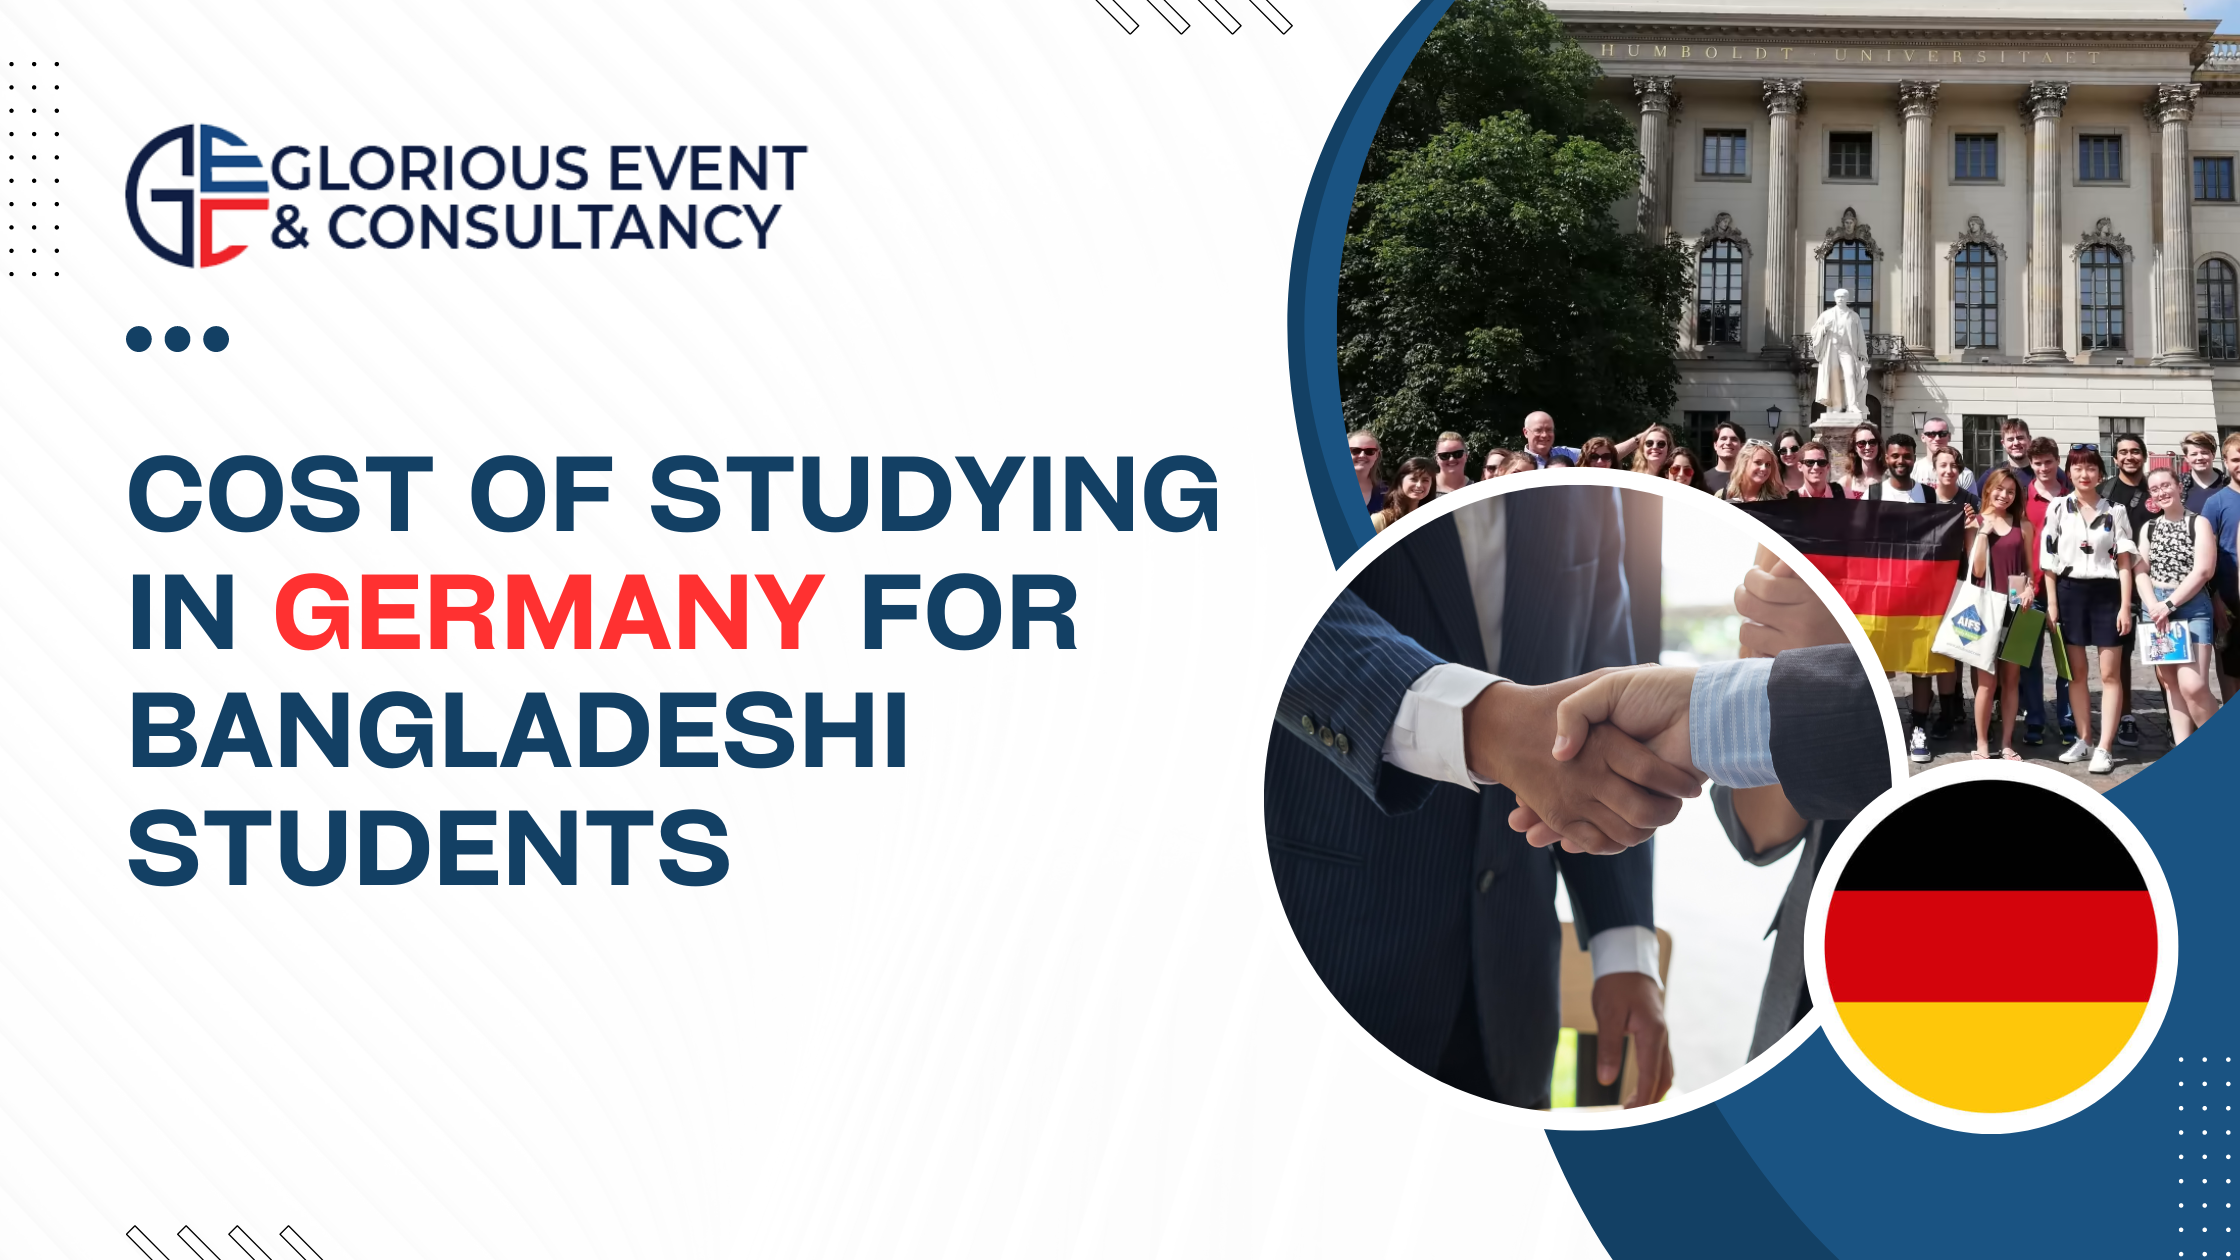 Cost of Studying in Germany for Bangladeshi Students